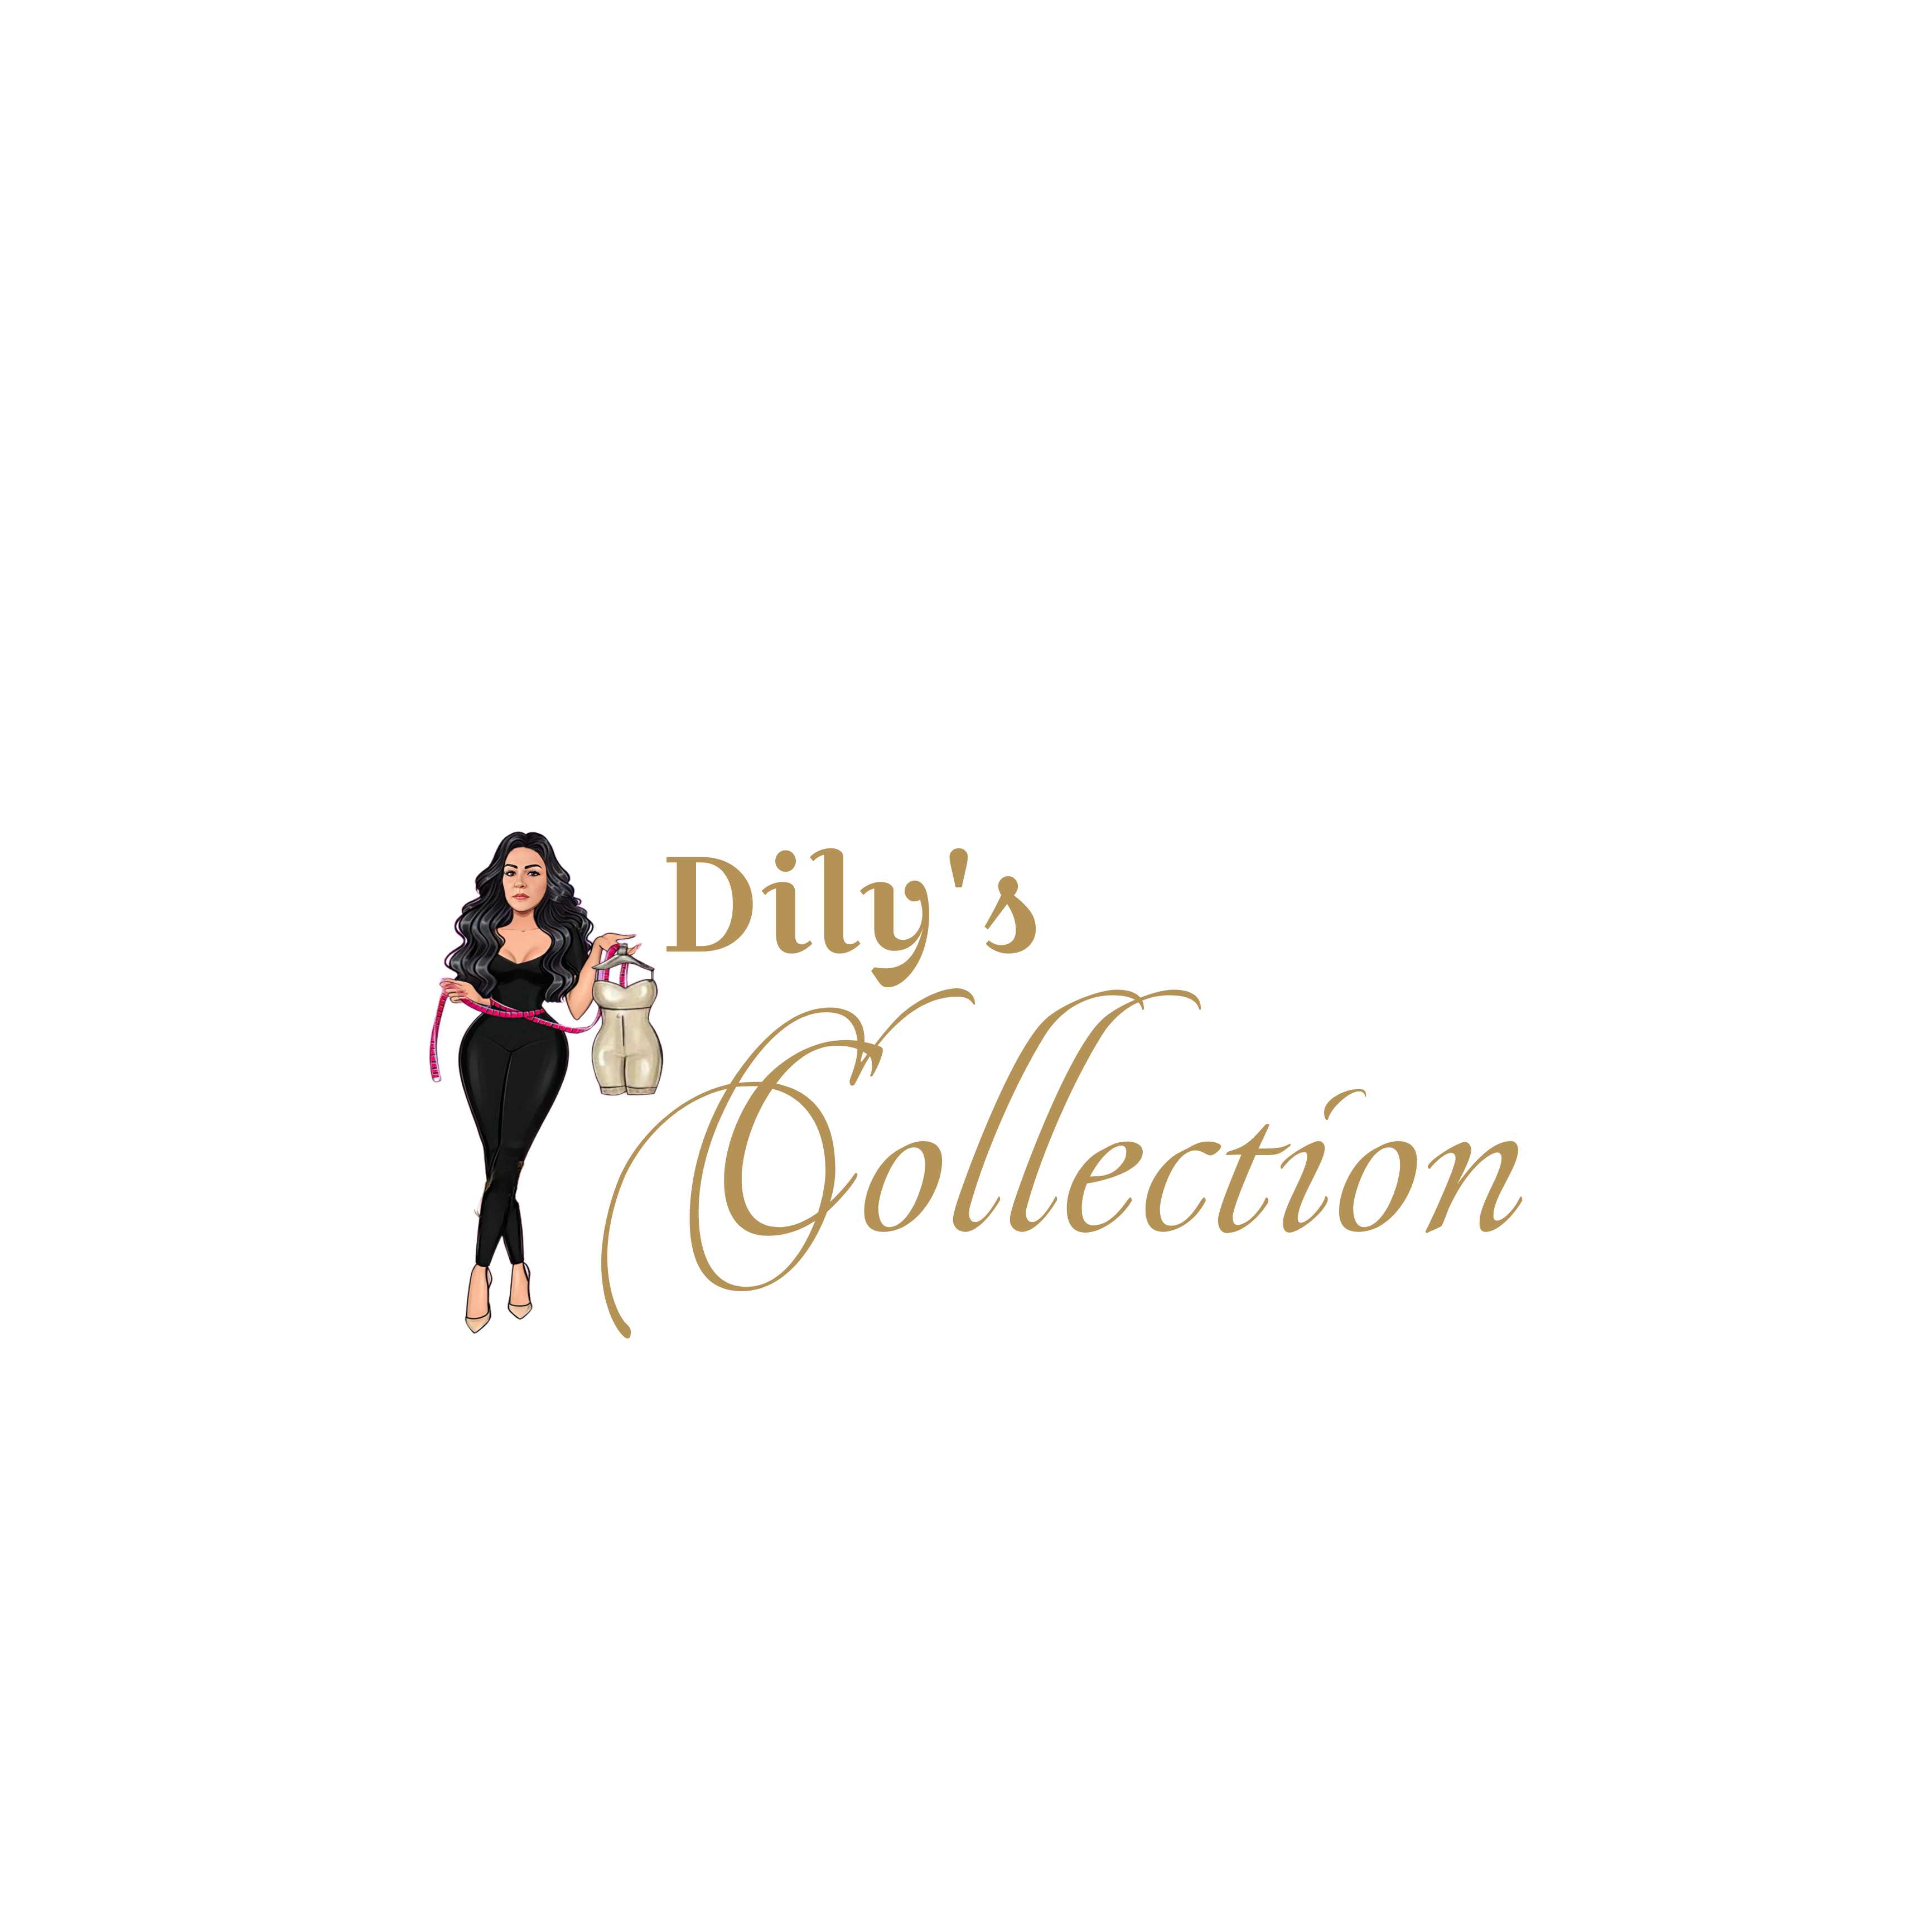 dilly's collection logo